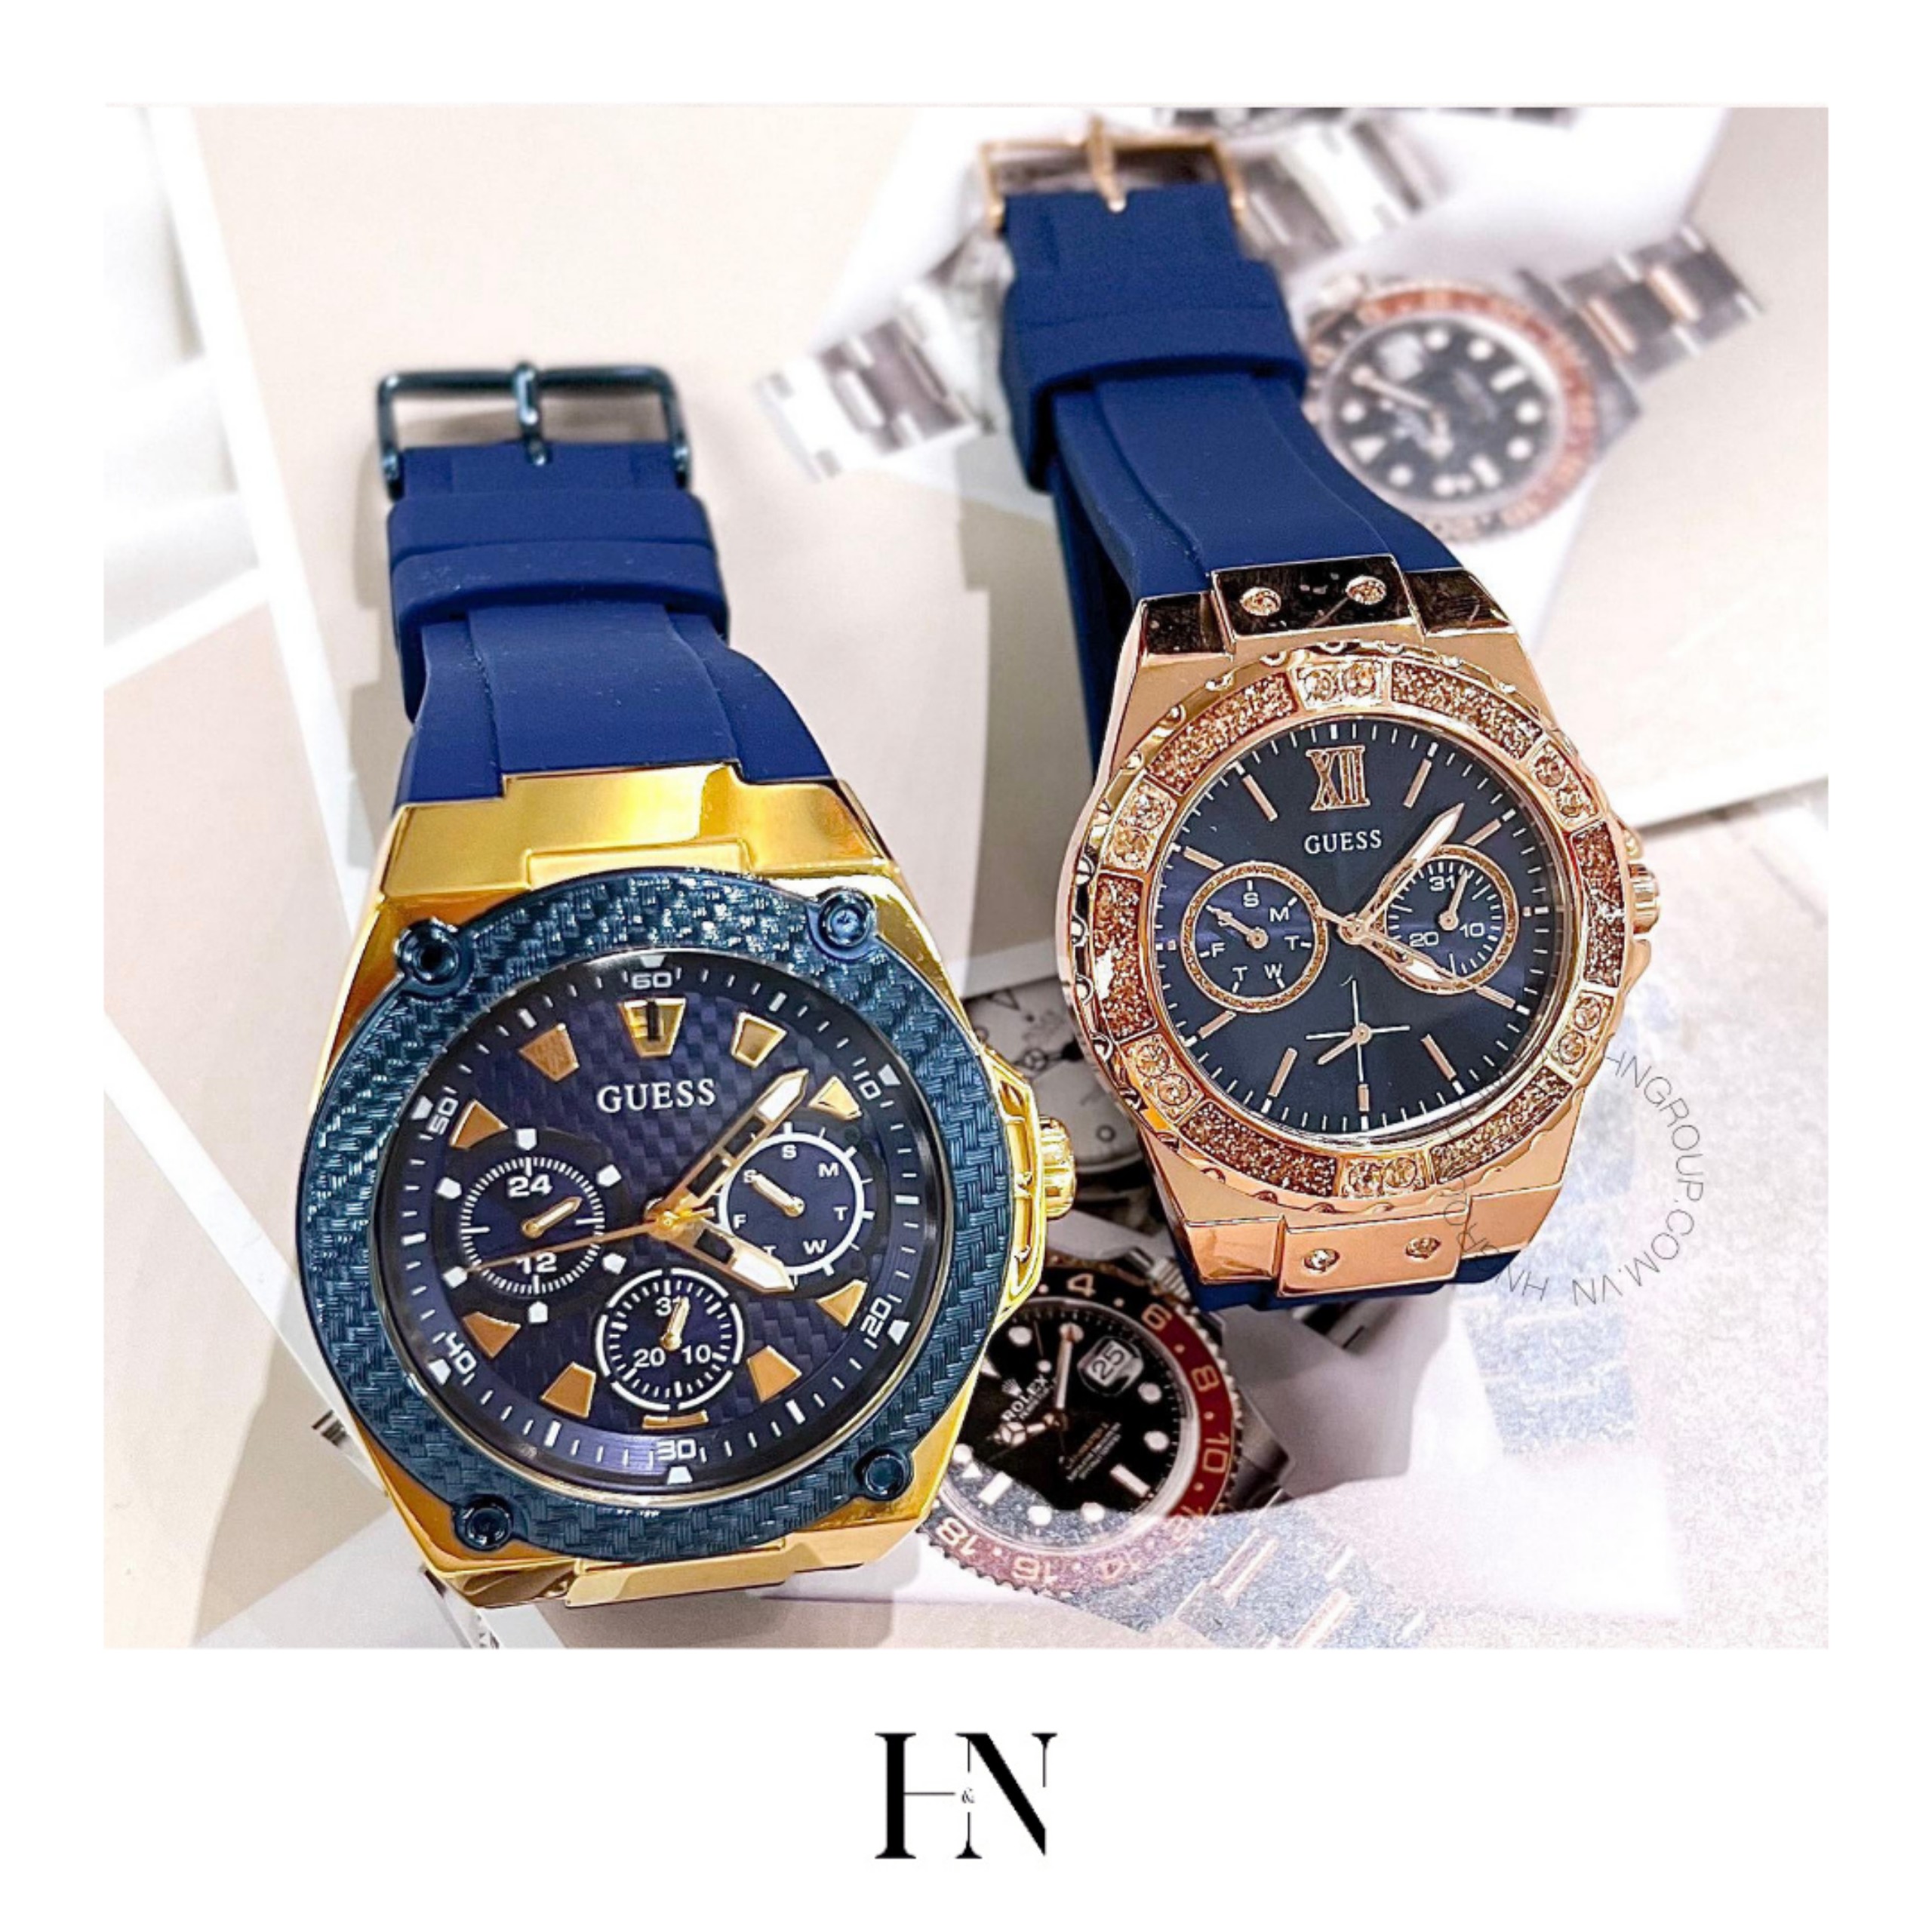 ĐỒNG HỒ CẶP GUESS WATCH FOR COUPLE